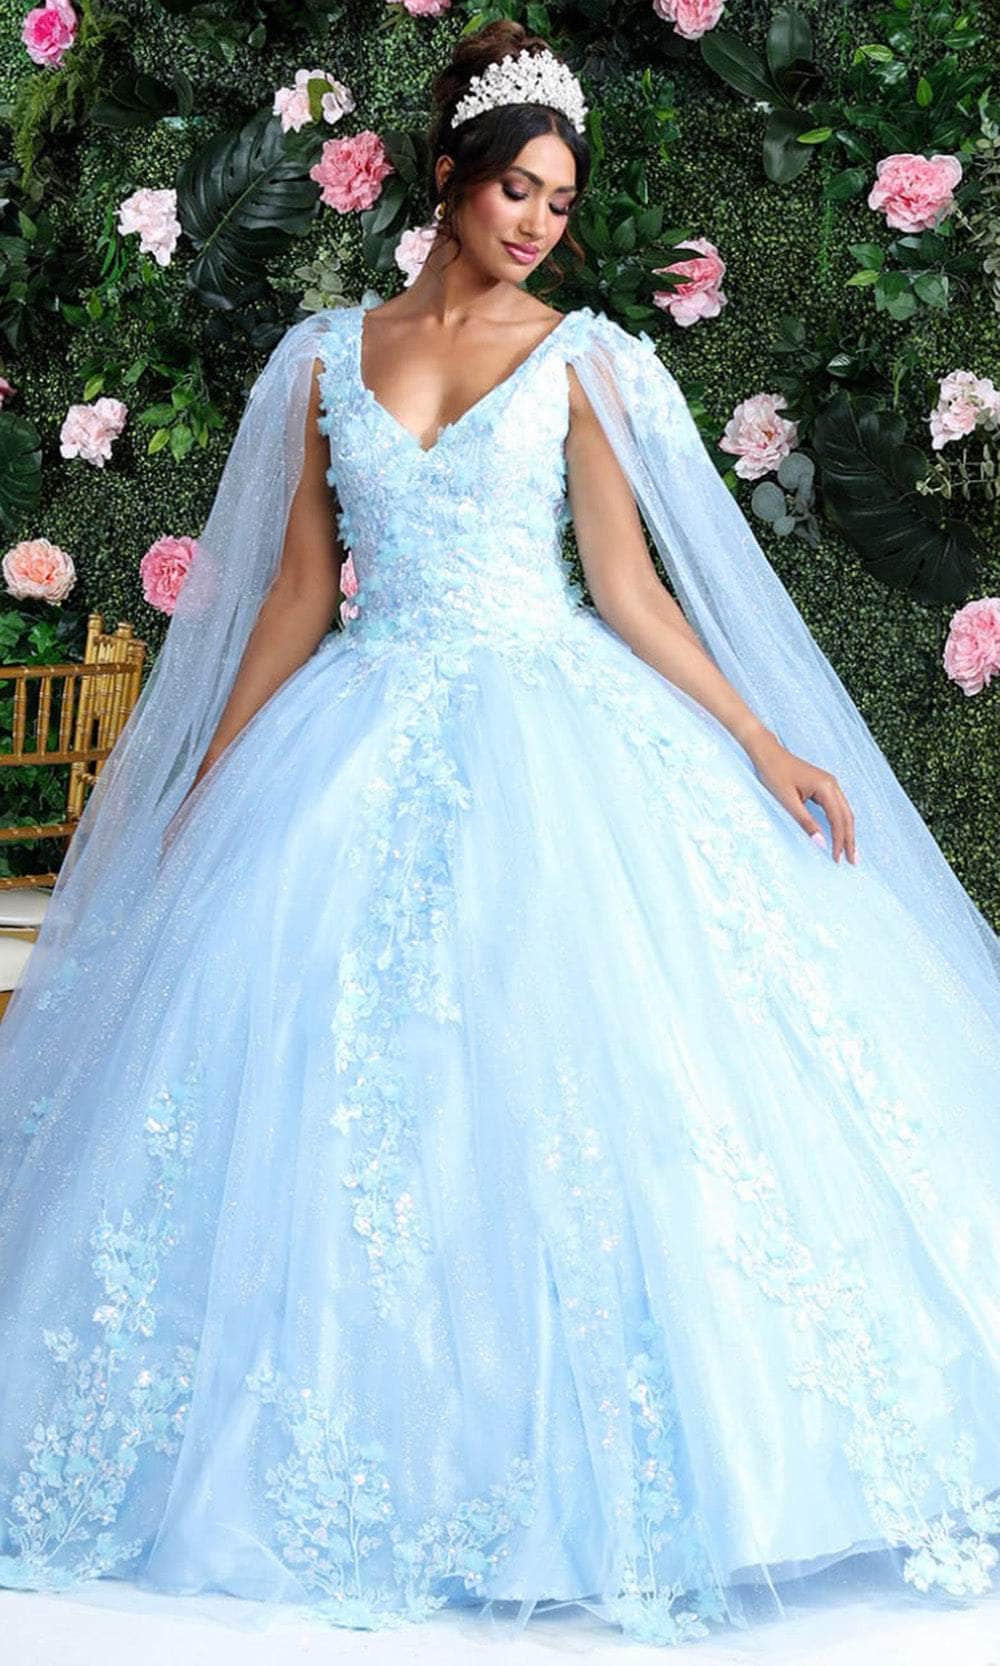 May Queen LK193 - Applique Cape Sleeve Ballgown Quinceanera Dresses 4 / Baby Blue